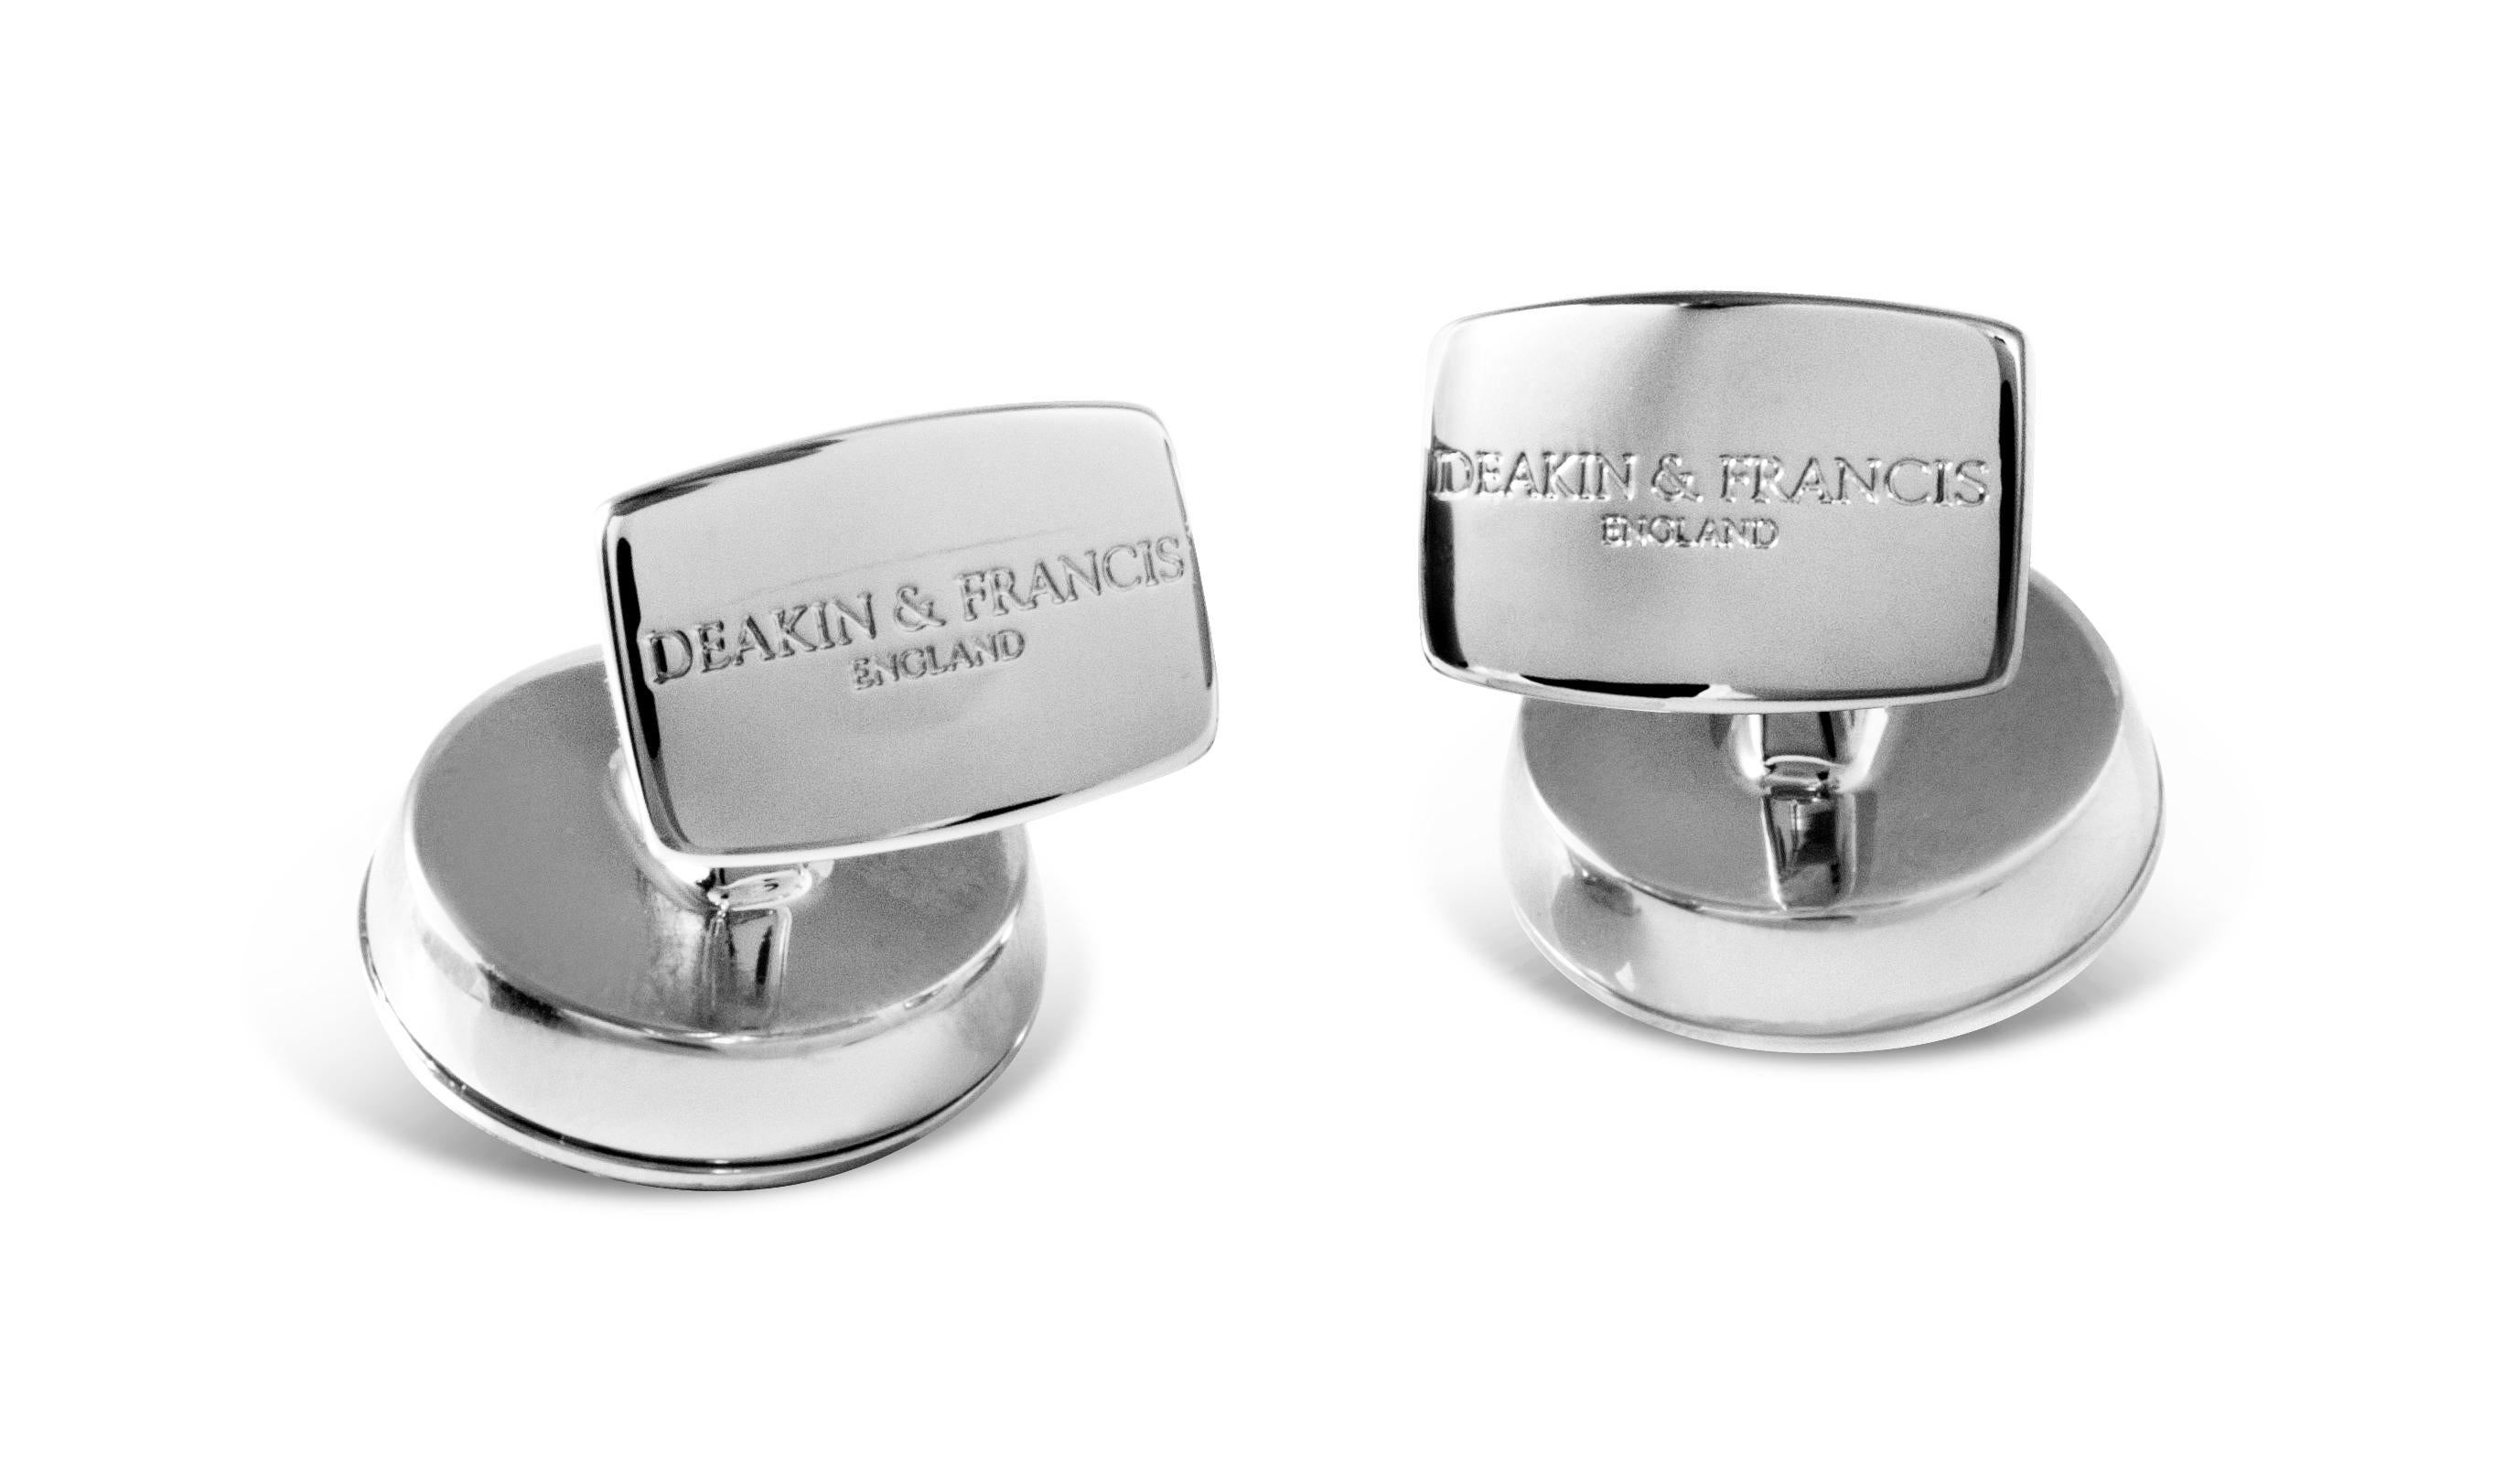 DEAKIN & FRANCIS, Piccadilly Arcade, London

Be hypnotic with your style with these freely rotating cufflinks in rose gold. These round barrel shape cufflinks enclose seamless clean lines, with a sharp etched parallel line pattern and a concealed